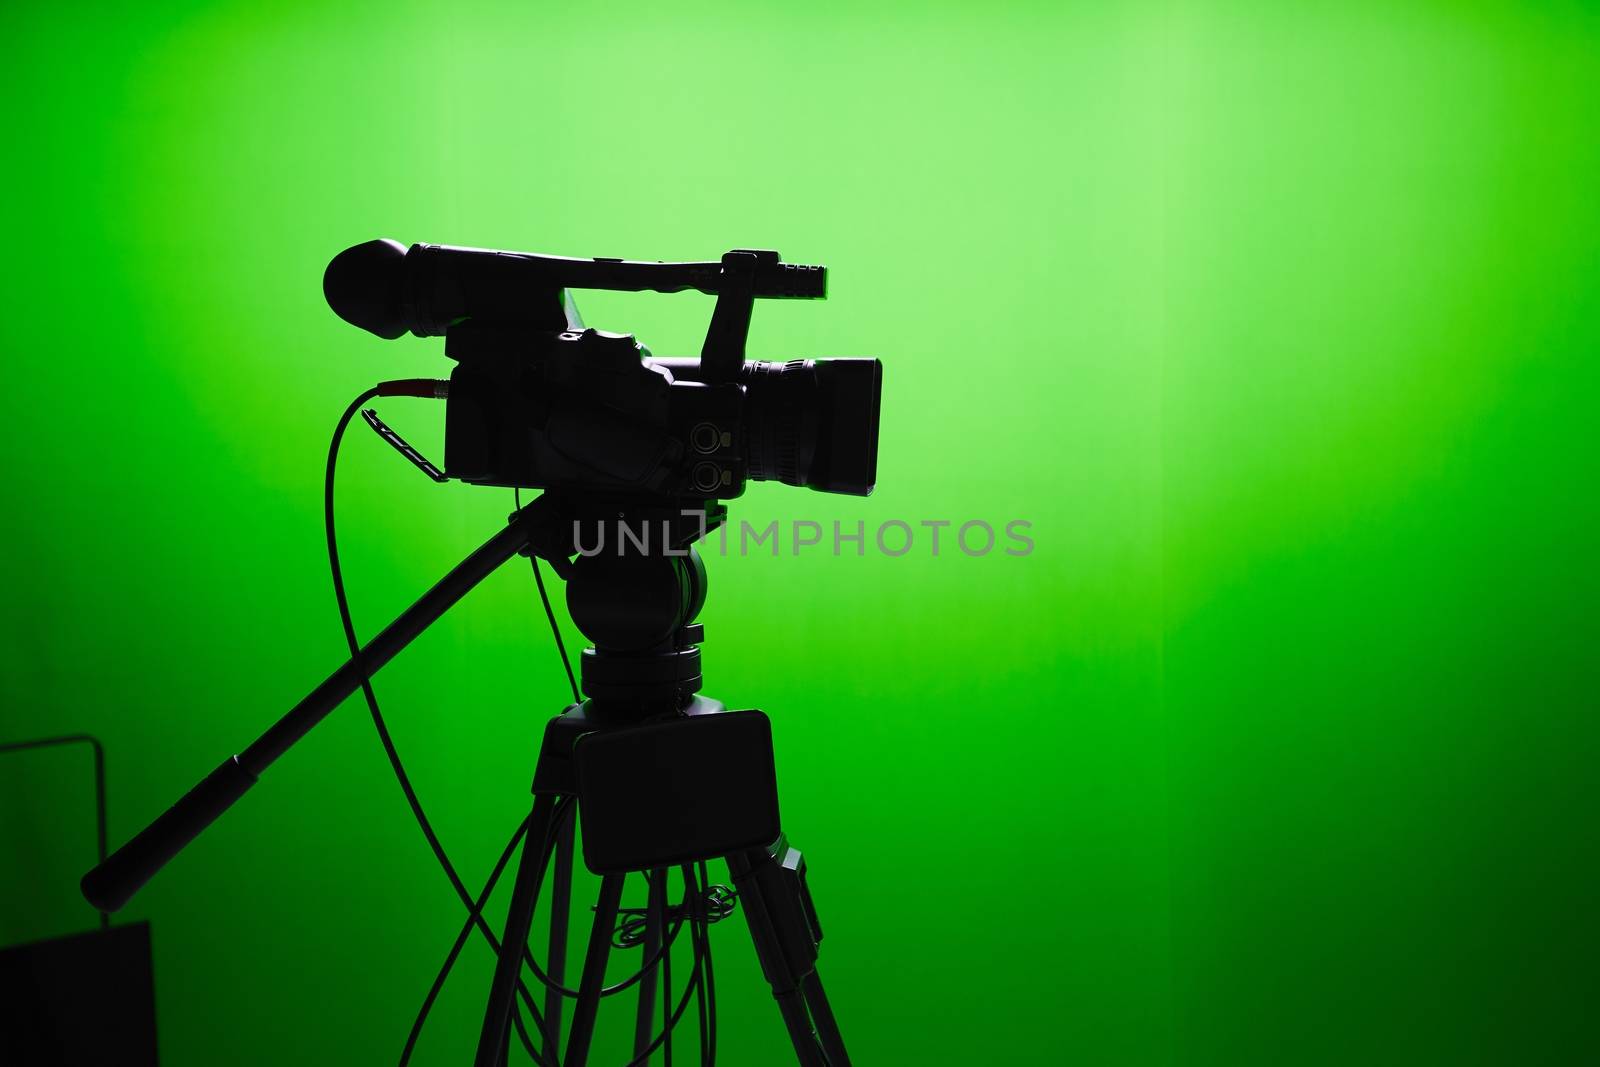 Silhouette of digital video camera in front of the green screen